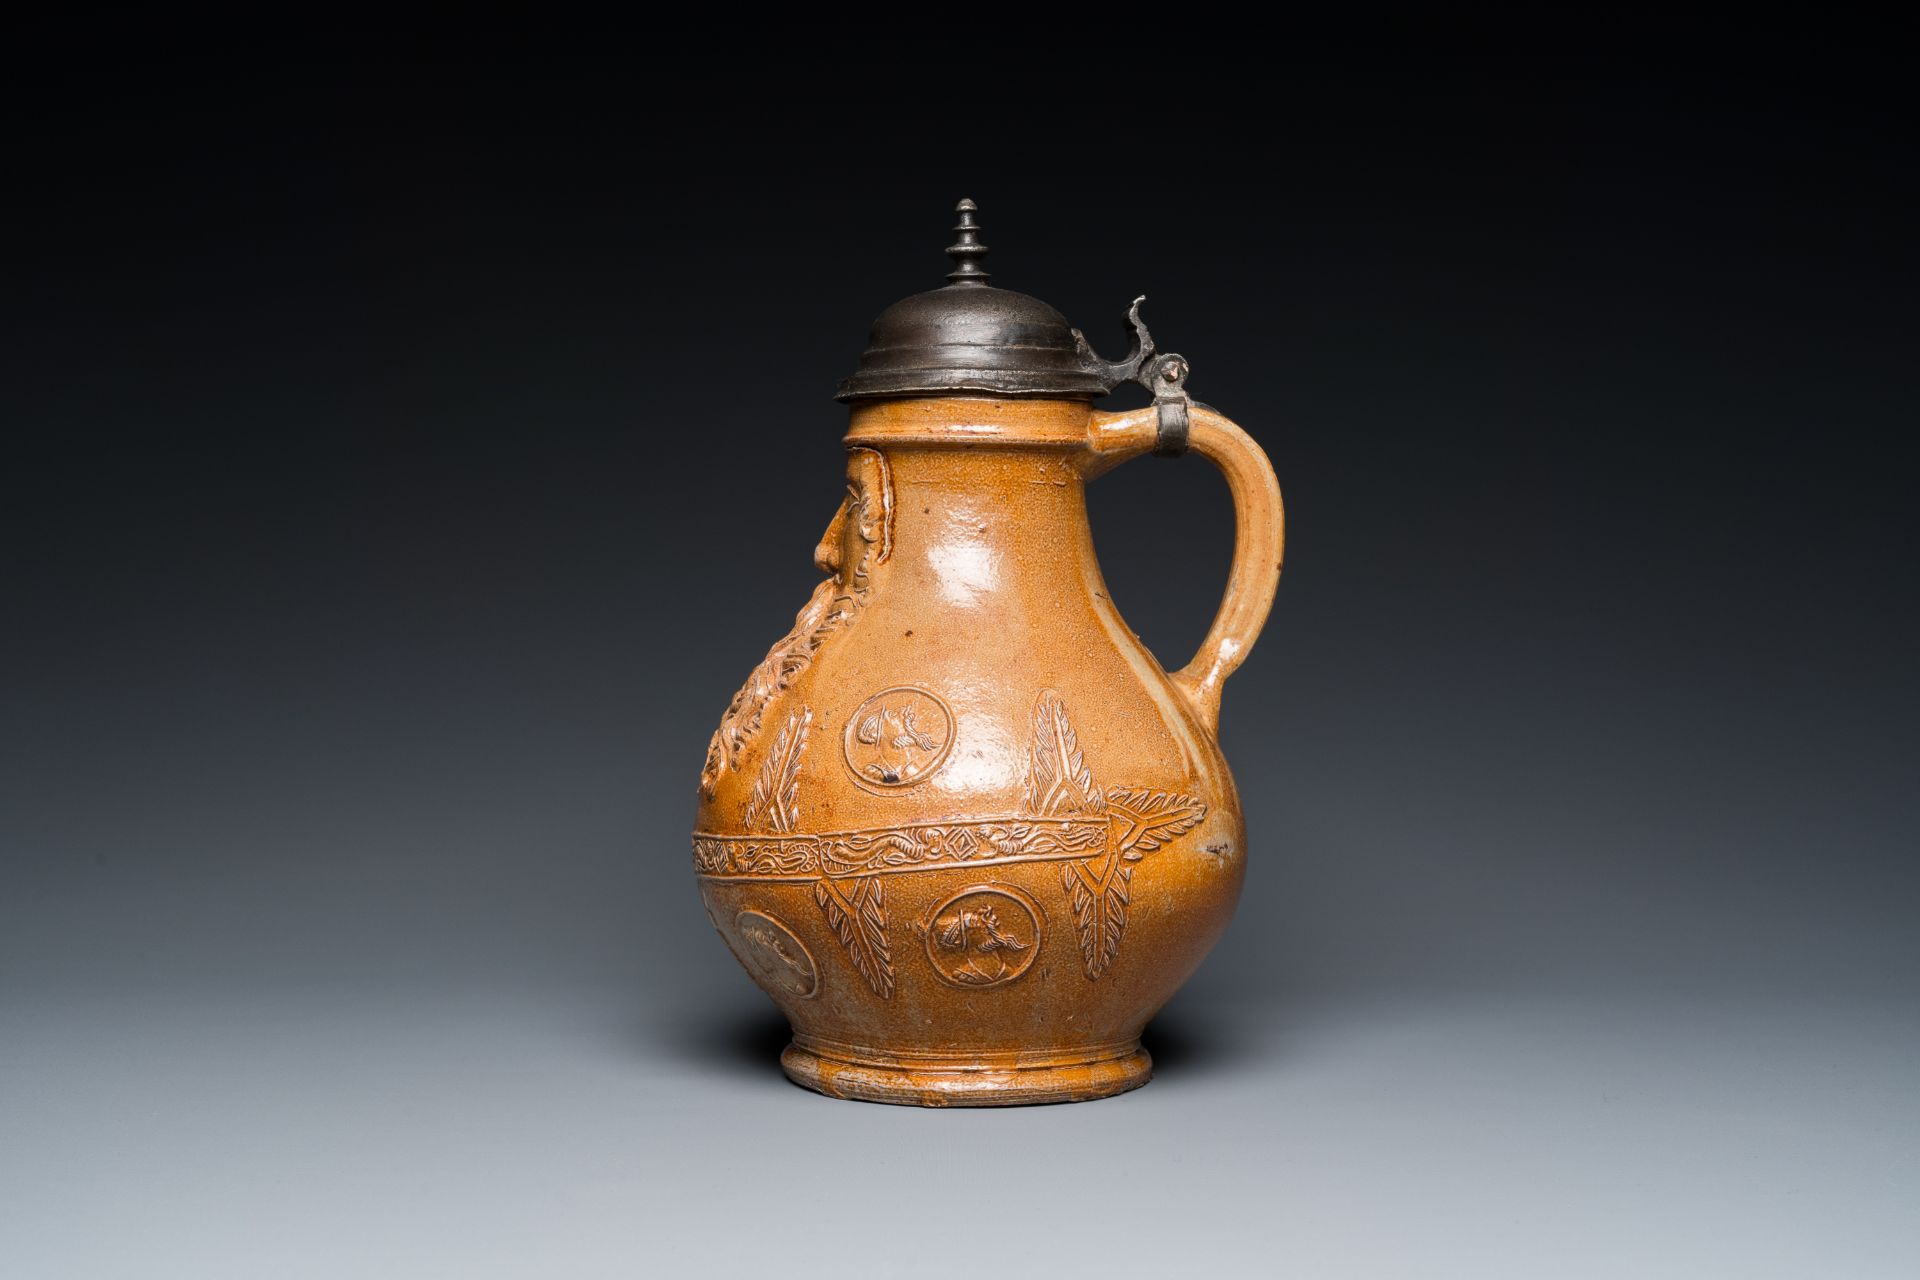 An exceptionally fine pewter-lidded stoneware bellarmine jug with portrait medallions, Cologne, Germ - Image 3 of 11